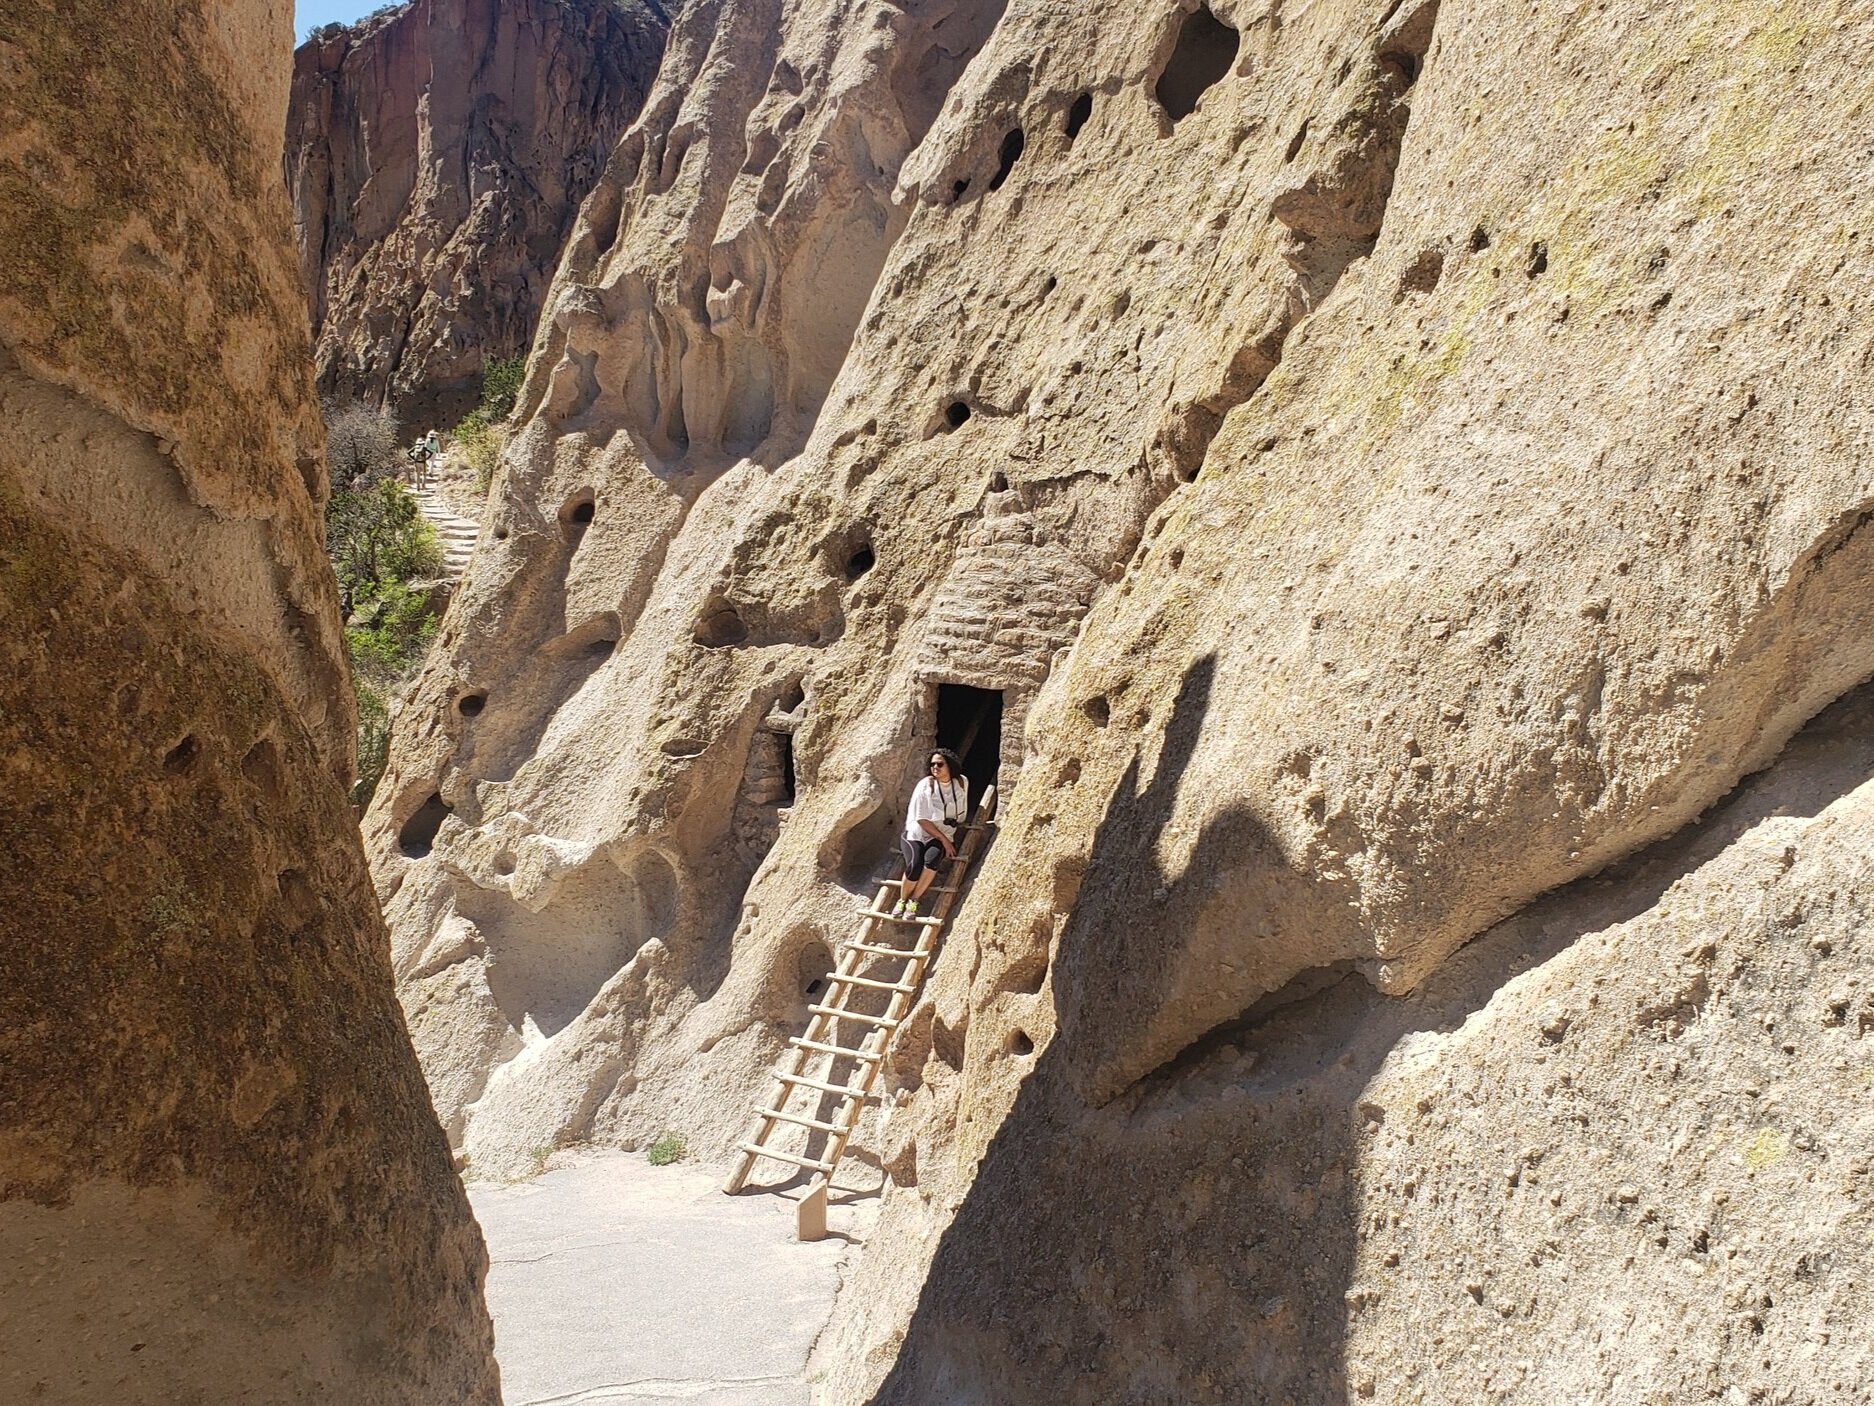 Cliff dwellings with ladder at Bandelier National Monument